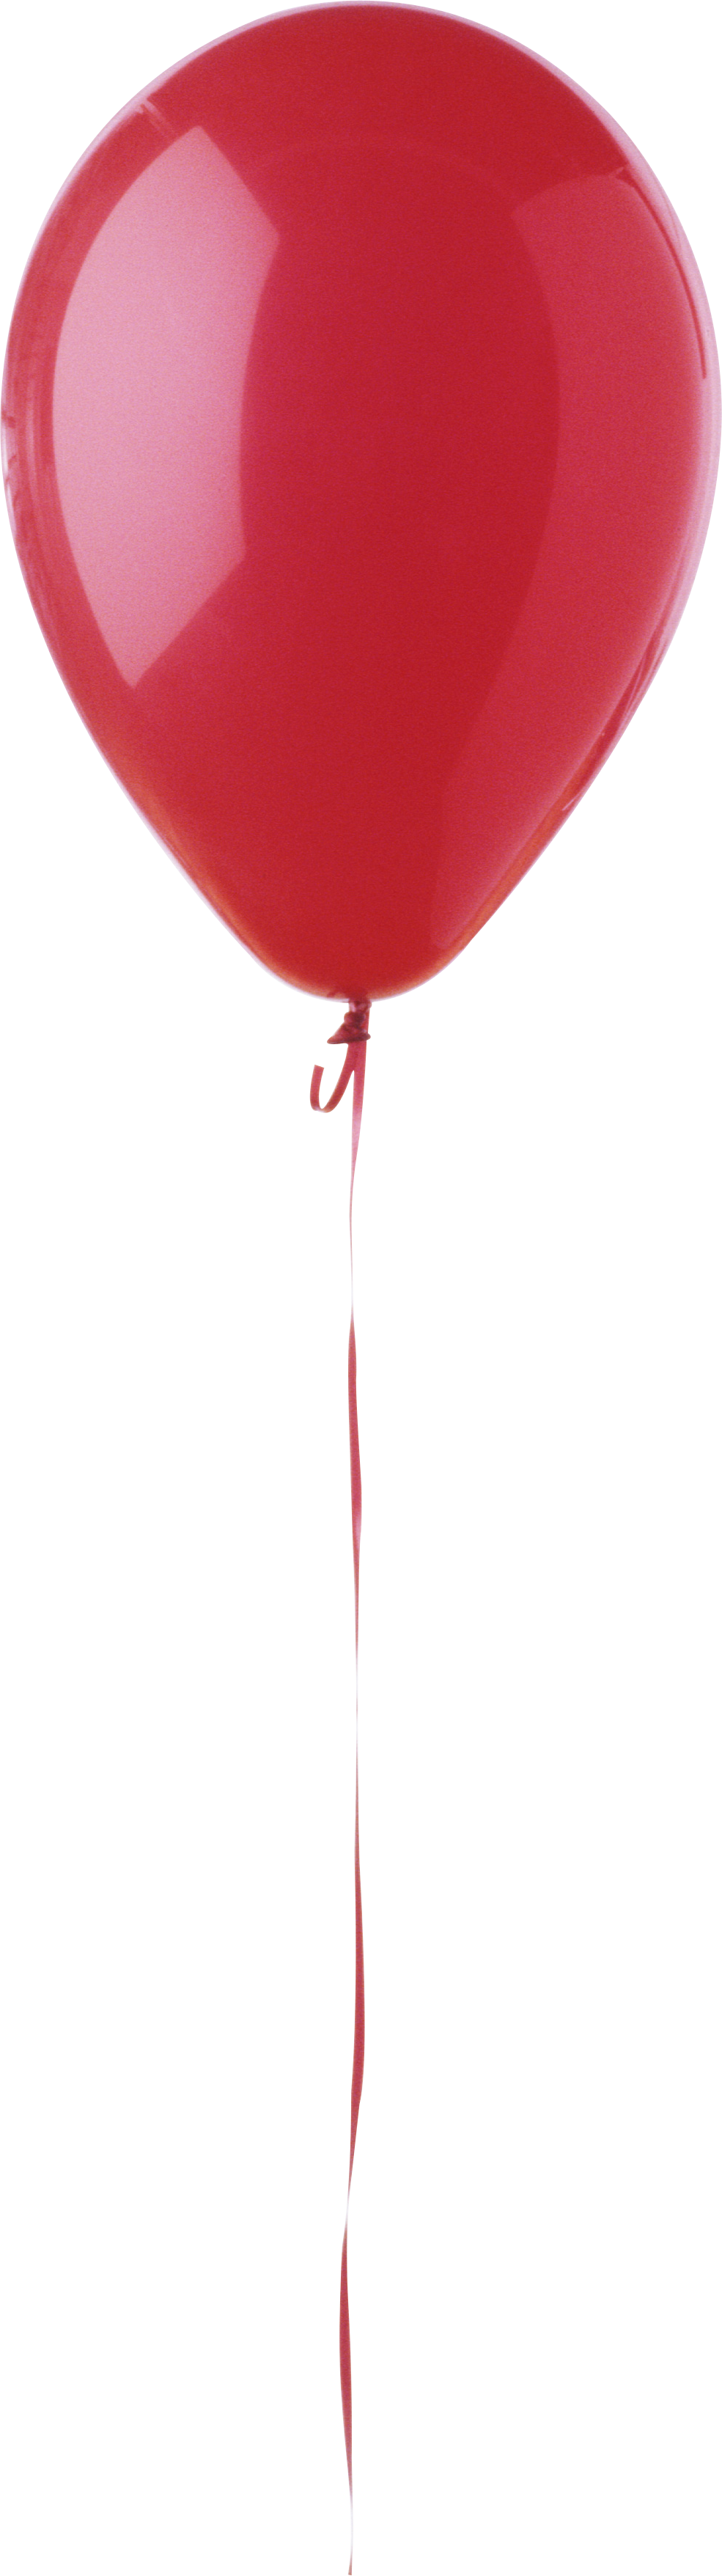 Balloons Png Image - One Balloon, Transparent background PNG HD thumbnail